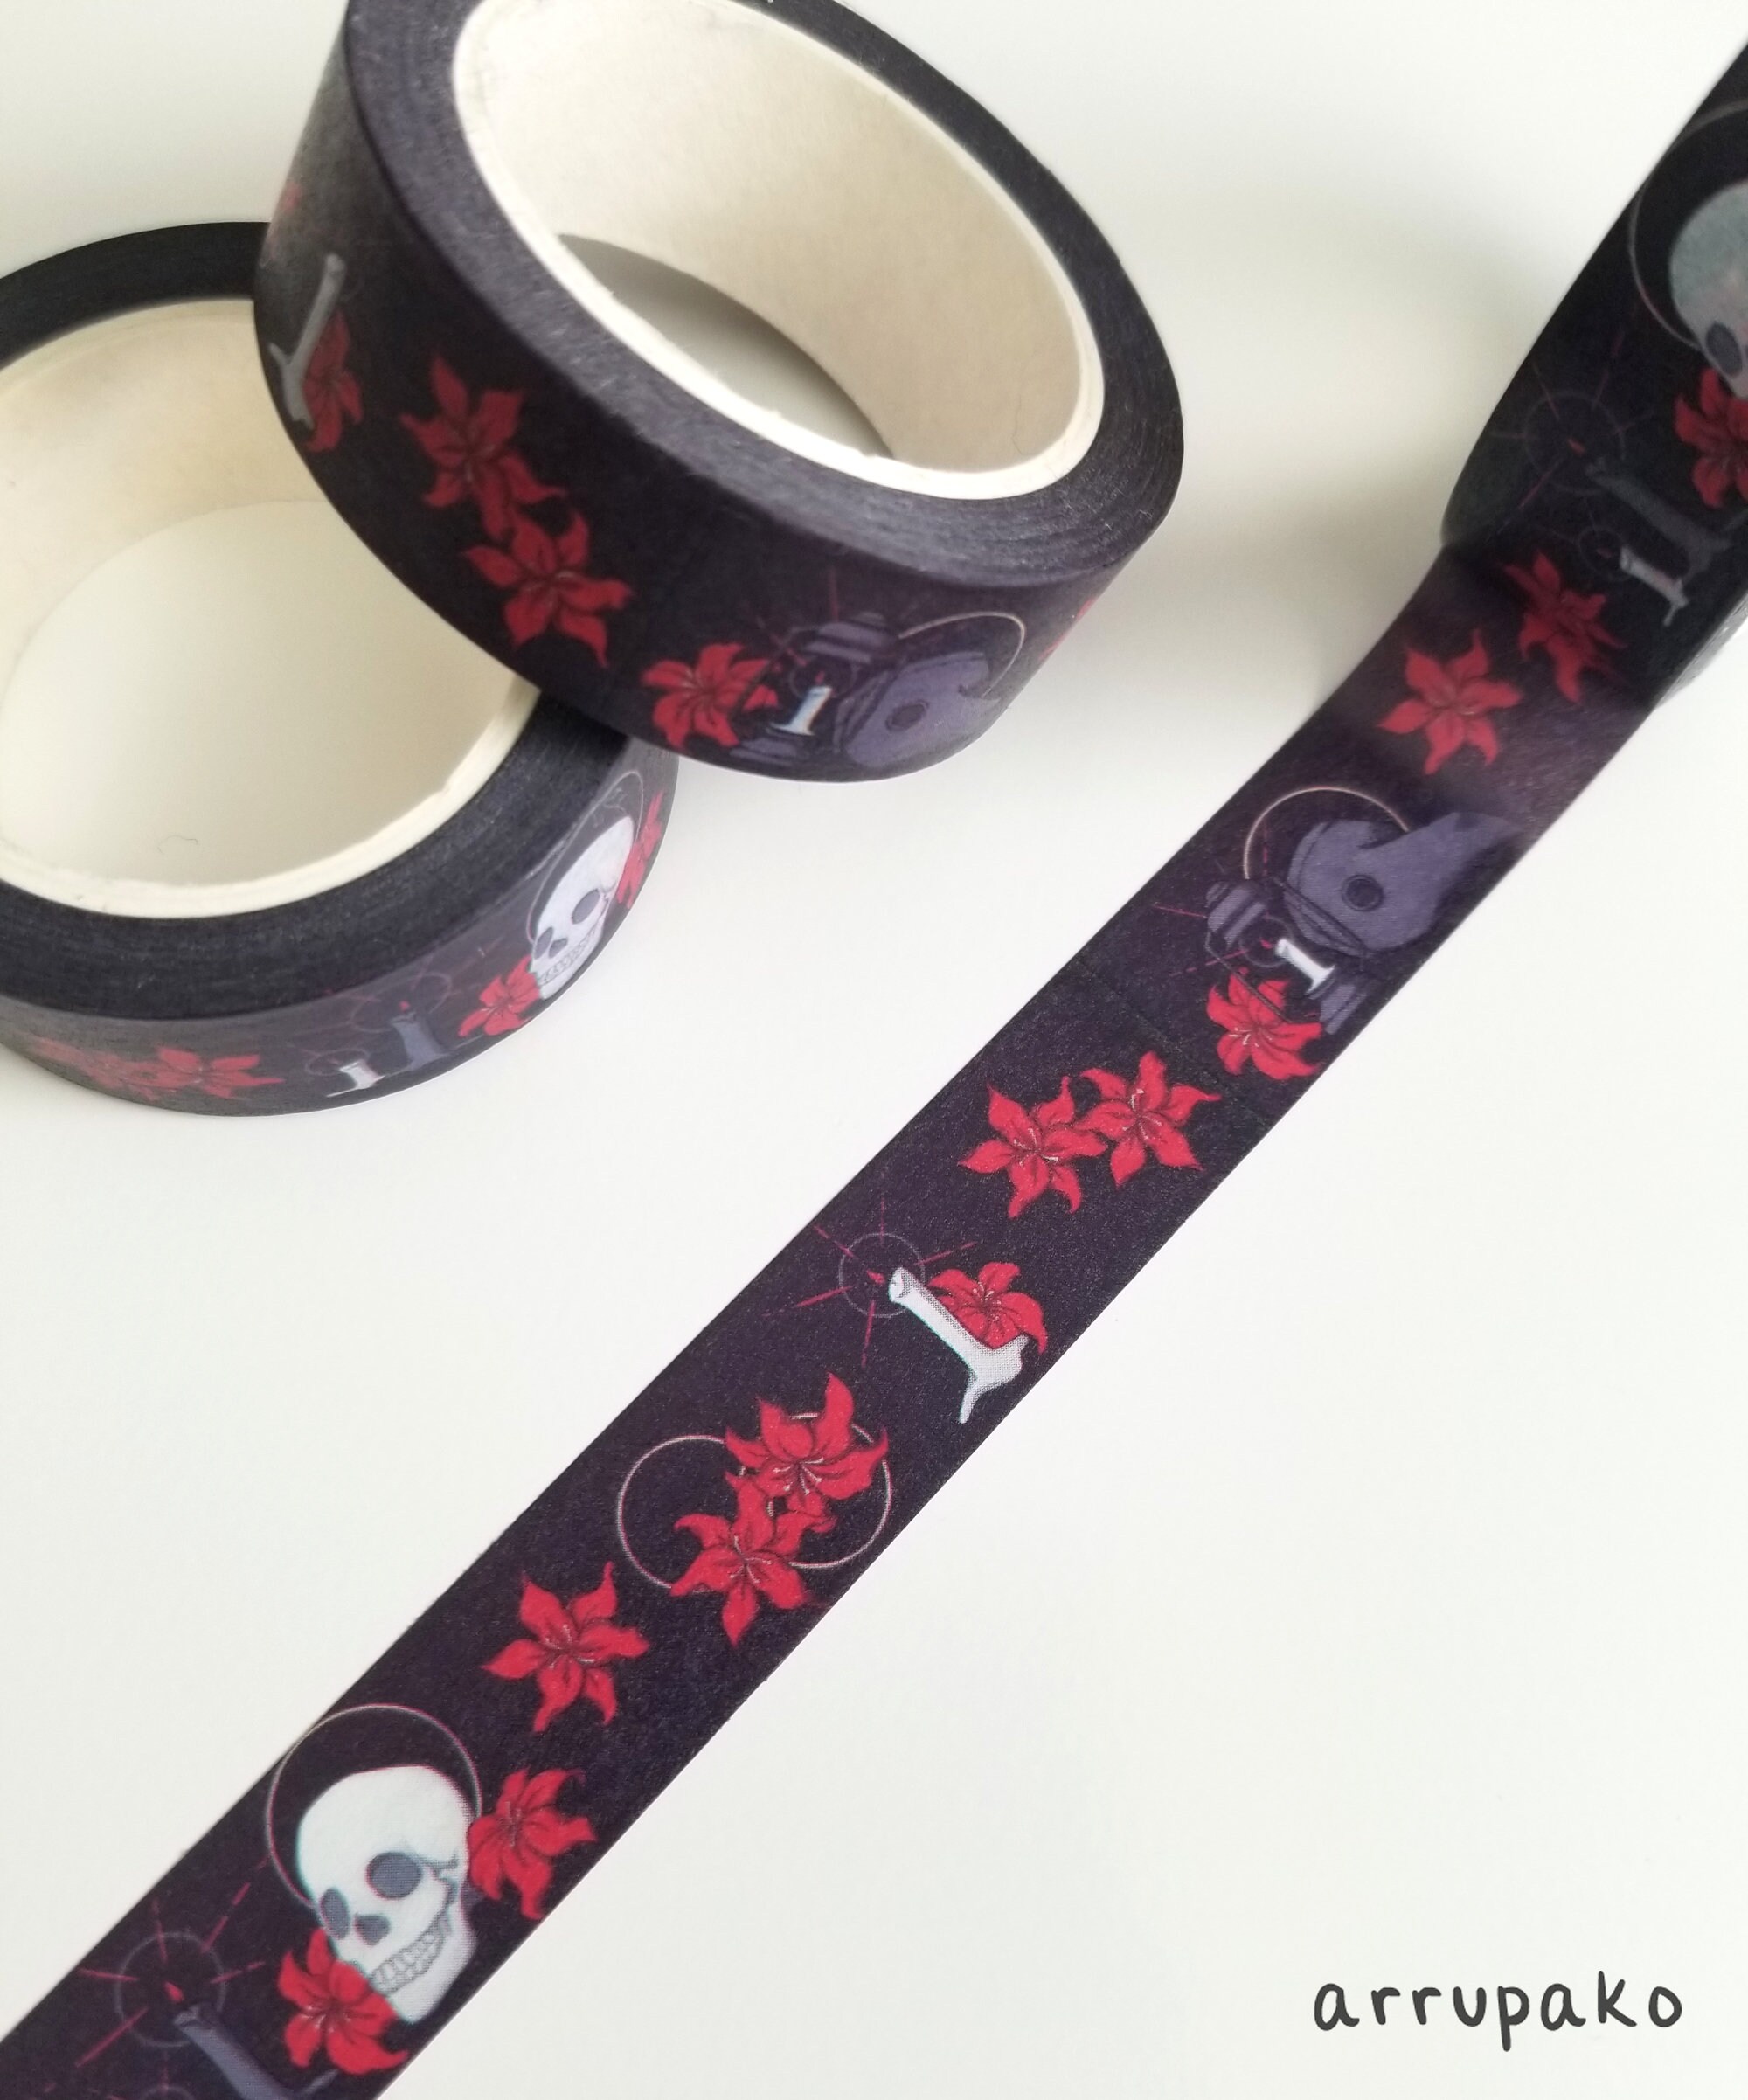 Plague Doctor Washi Tape - Home